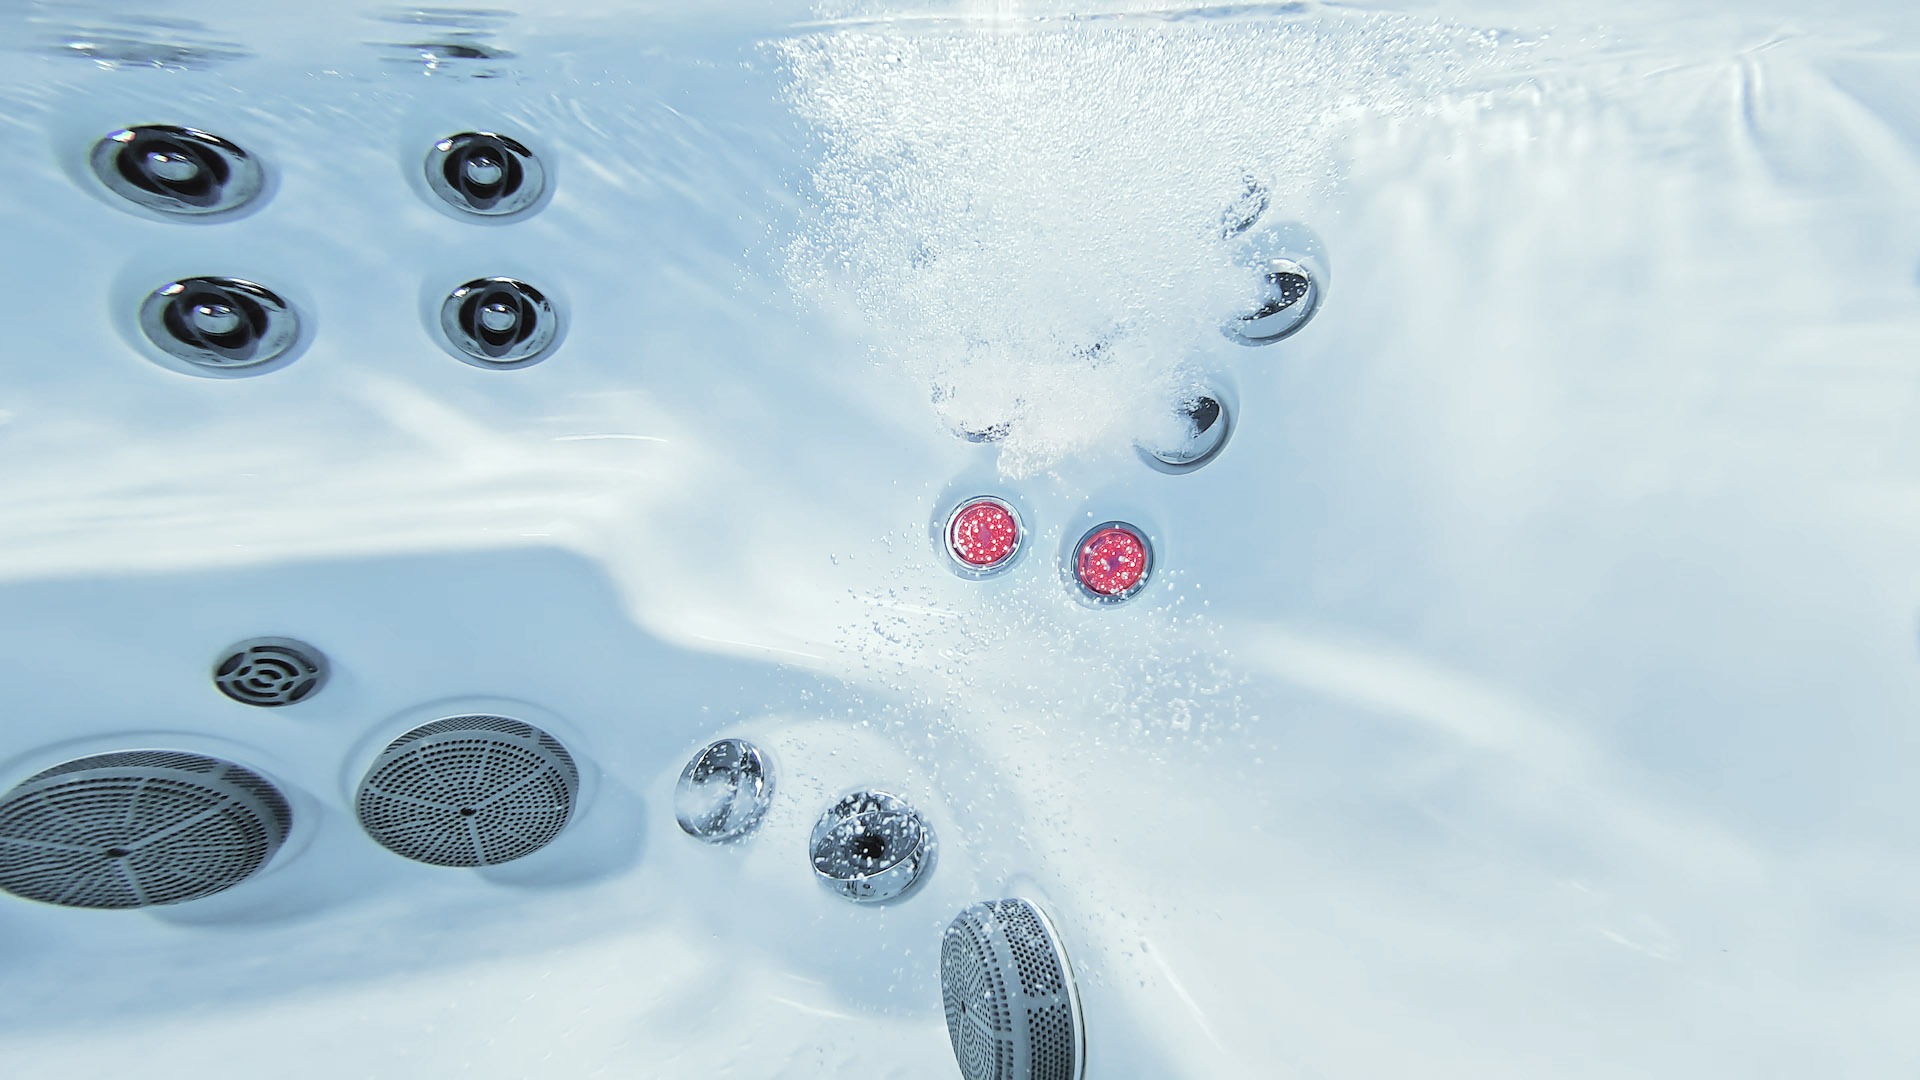 jacuzzi-spa-j-lx-features-ir-therapy-jets-on-lights-on.jpg